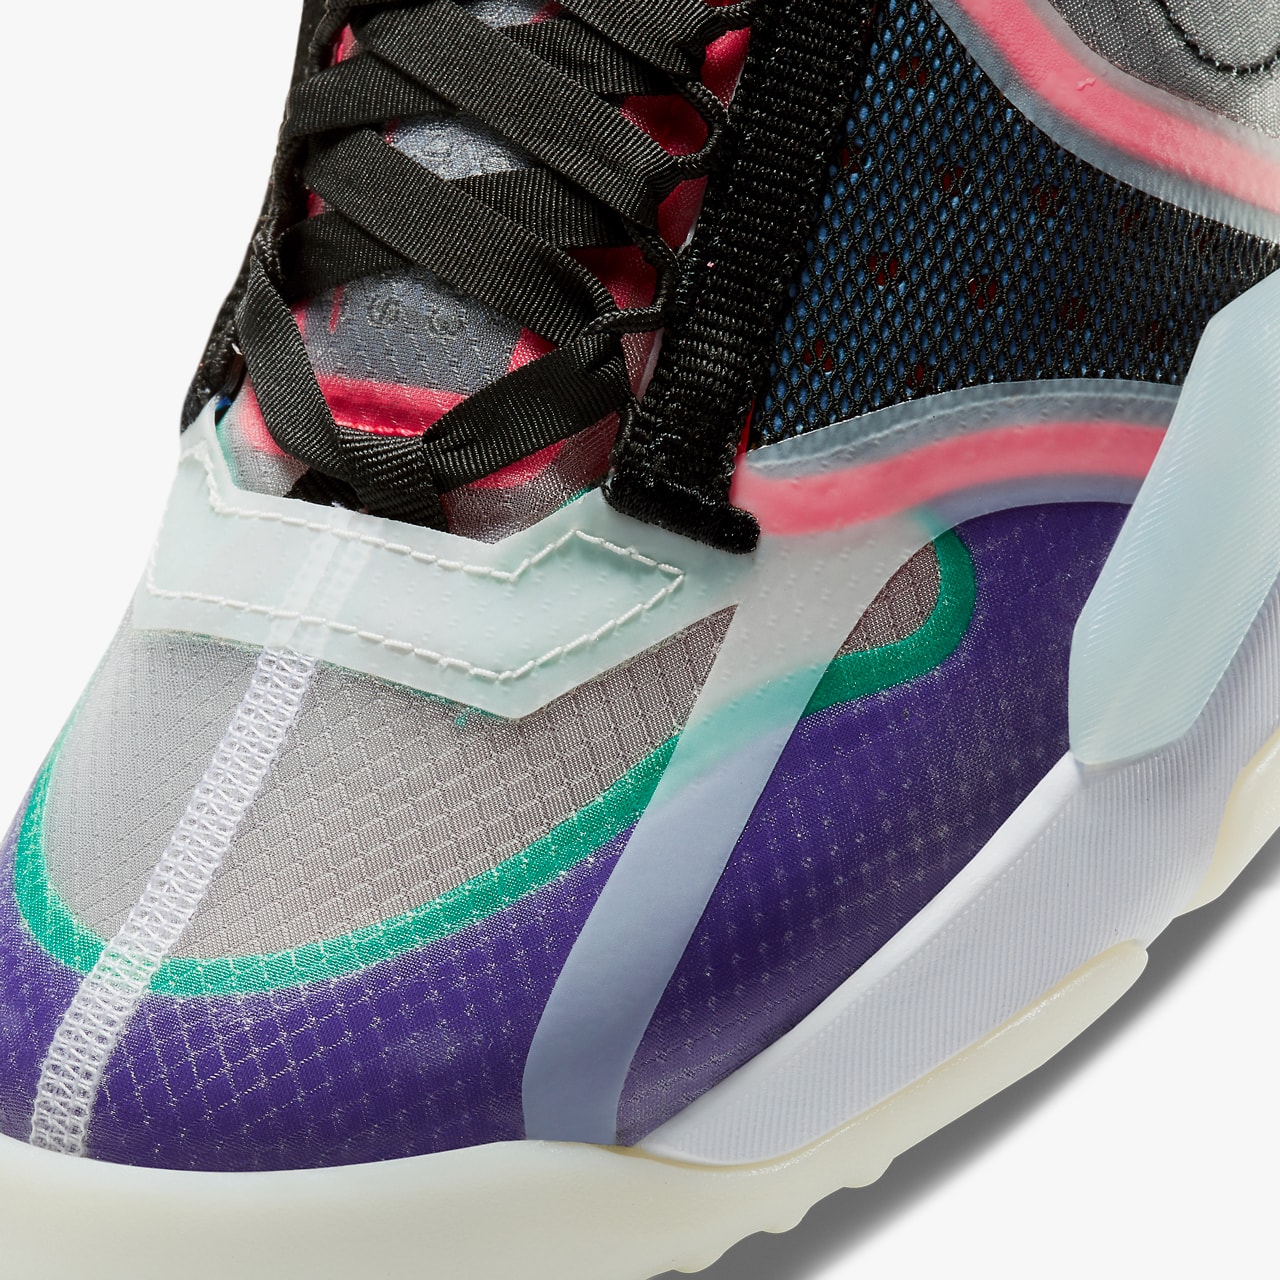 air jordan brand delta breathe multicolor clear white dark concord black purple red green blue CW0783 900 official release date info photos price store list buying guide